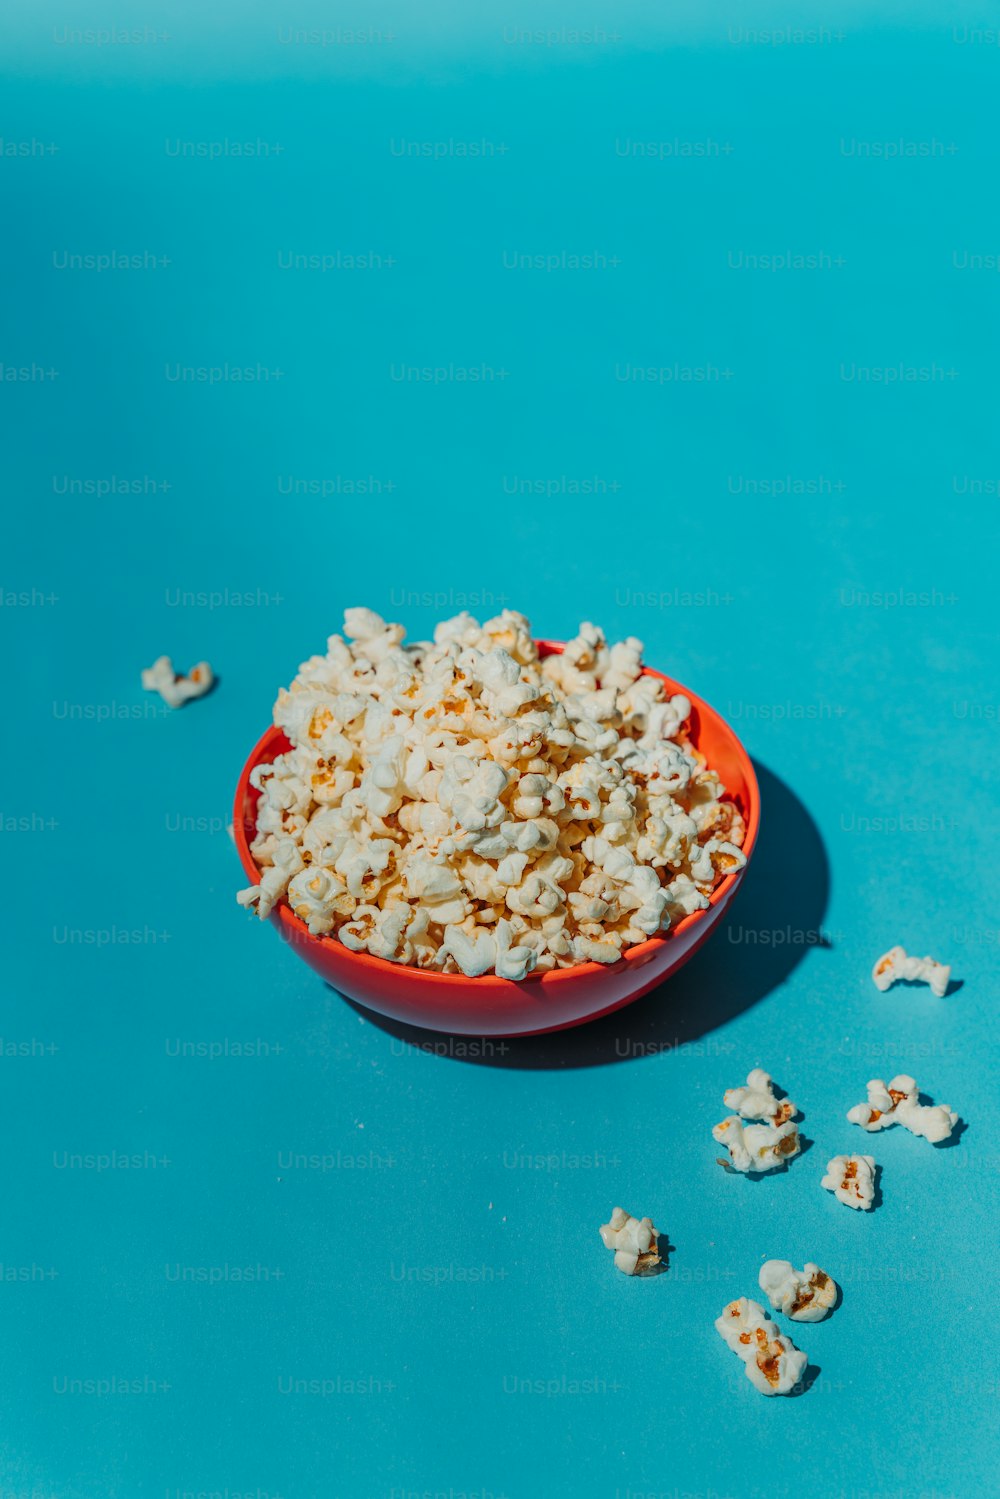 a bowl of popcorn on a blue surface